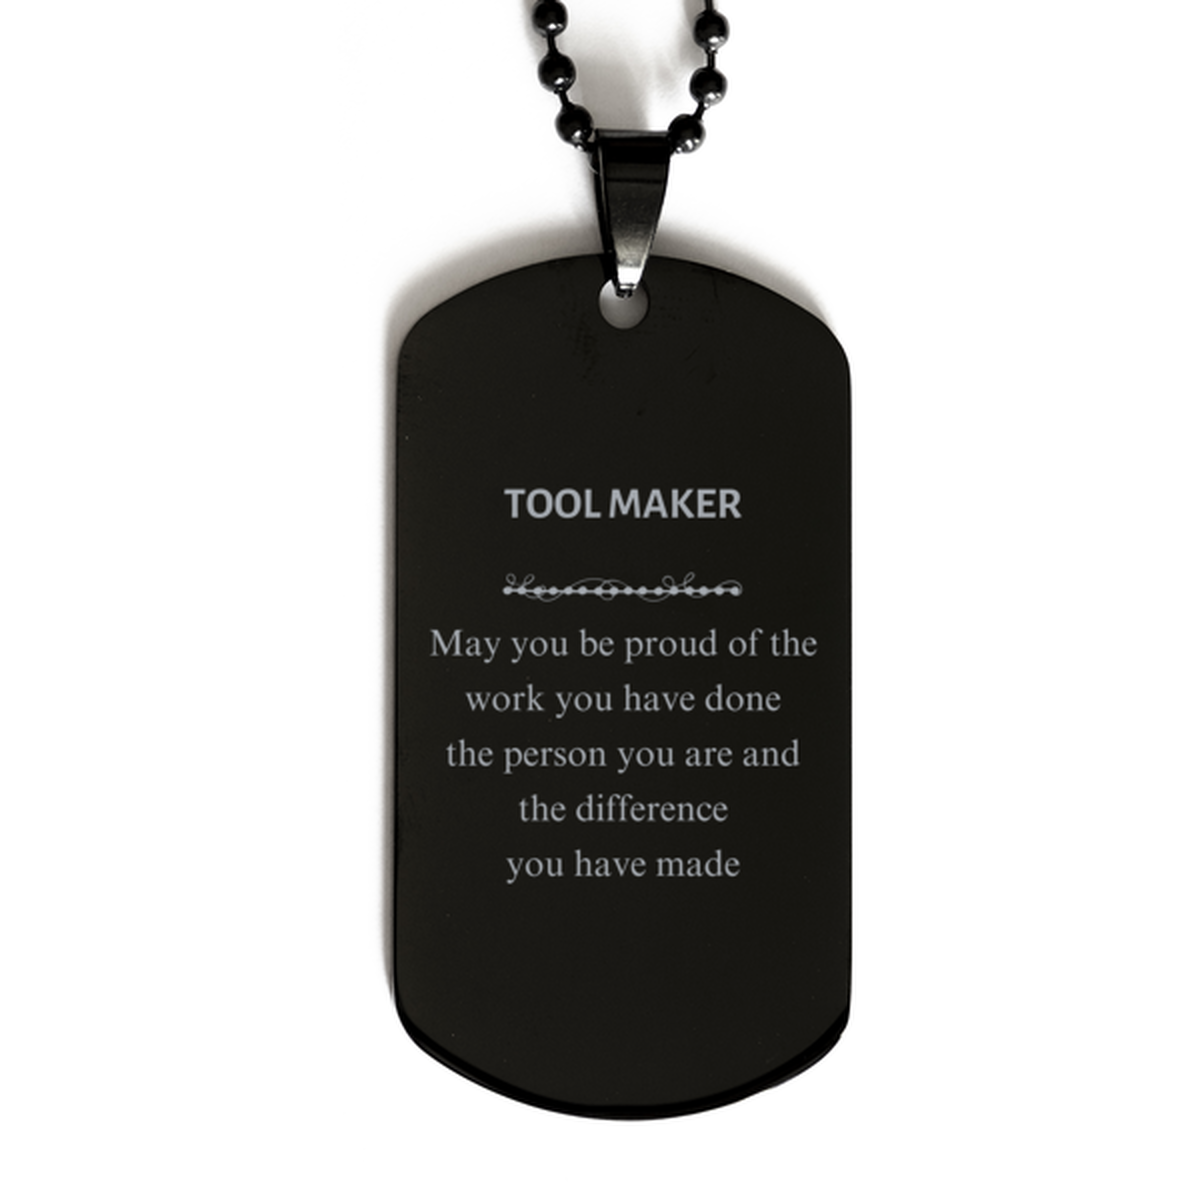 Tool Maker May you be proud of the work you have done, Retirement Tool Maker Black Dog Tag for Colleague Appreciation Gifts Amazing for Tool Maker